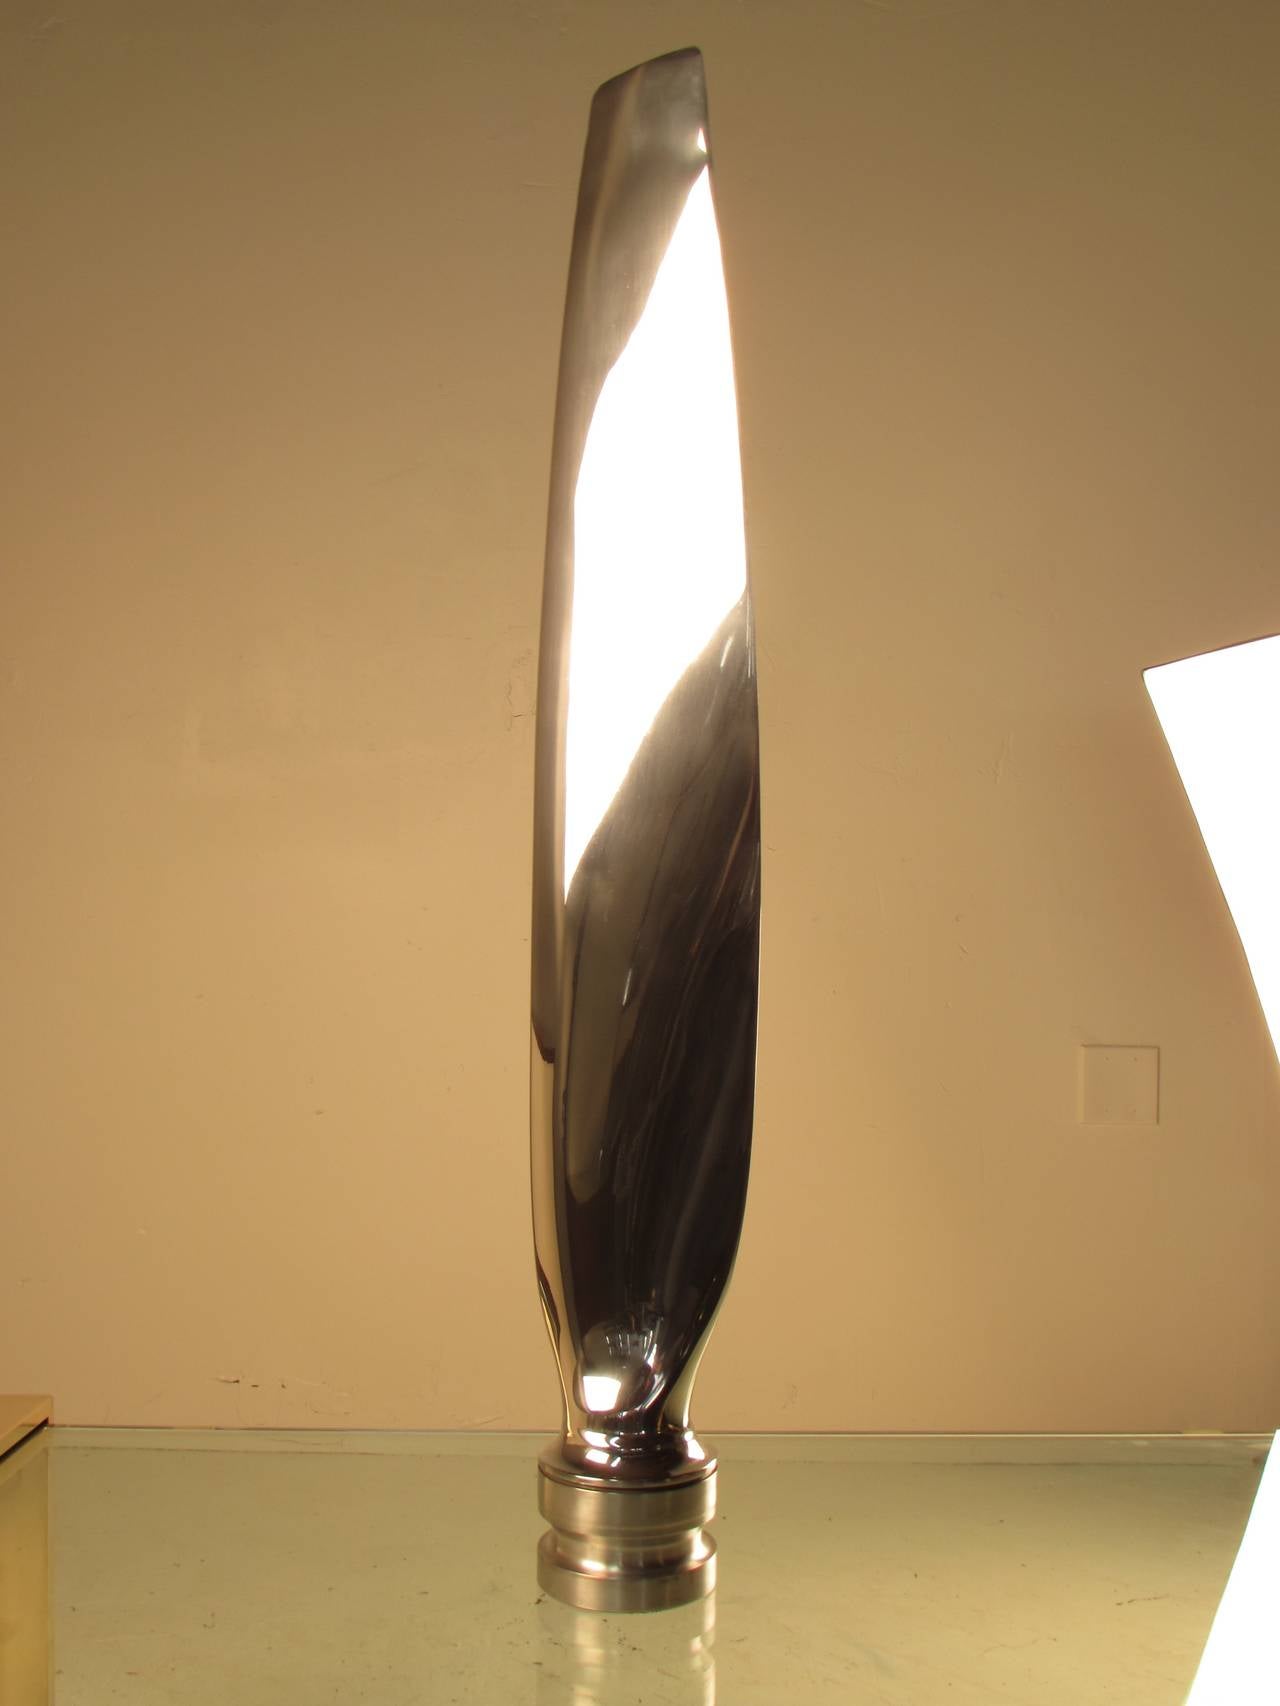 Machine Age freestanding cast aluminum military plane propeller blade on a steel base. We have just had this piece highly mirror polished and the result is utterly spectacular! Intriguing piece of Industrial sculpture.